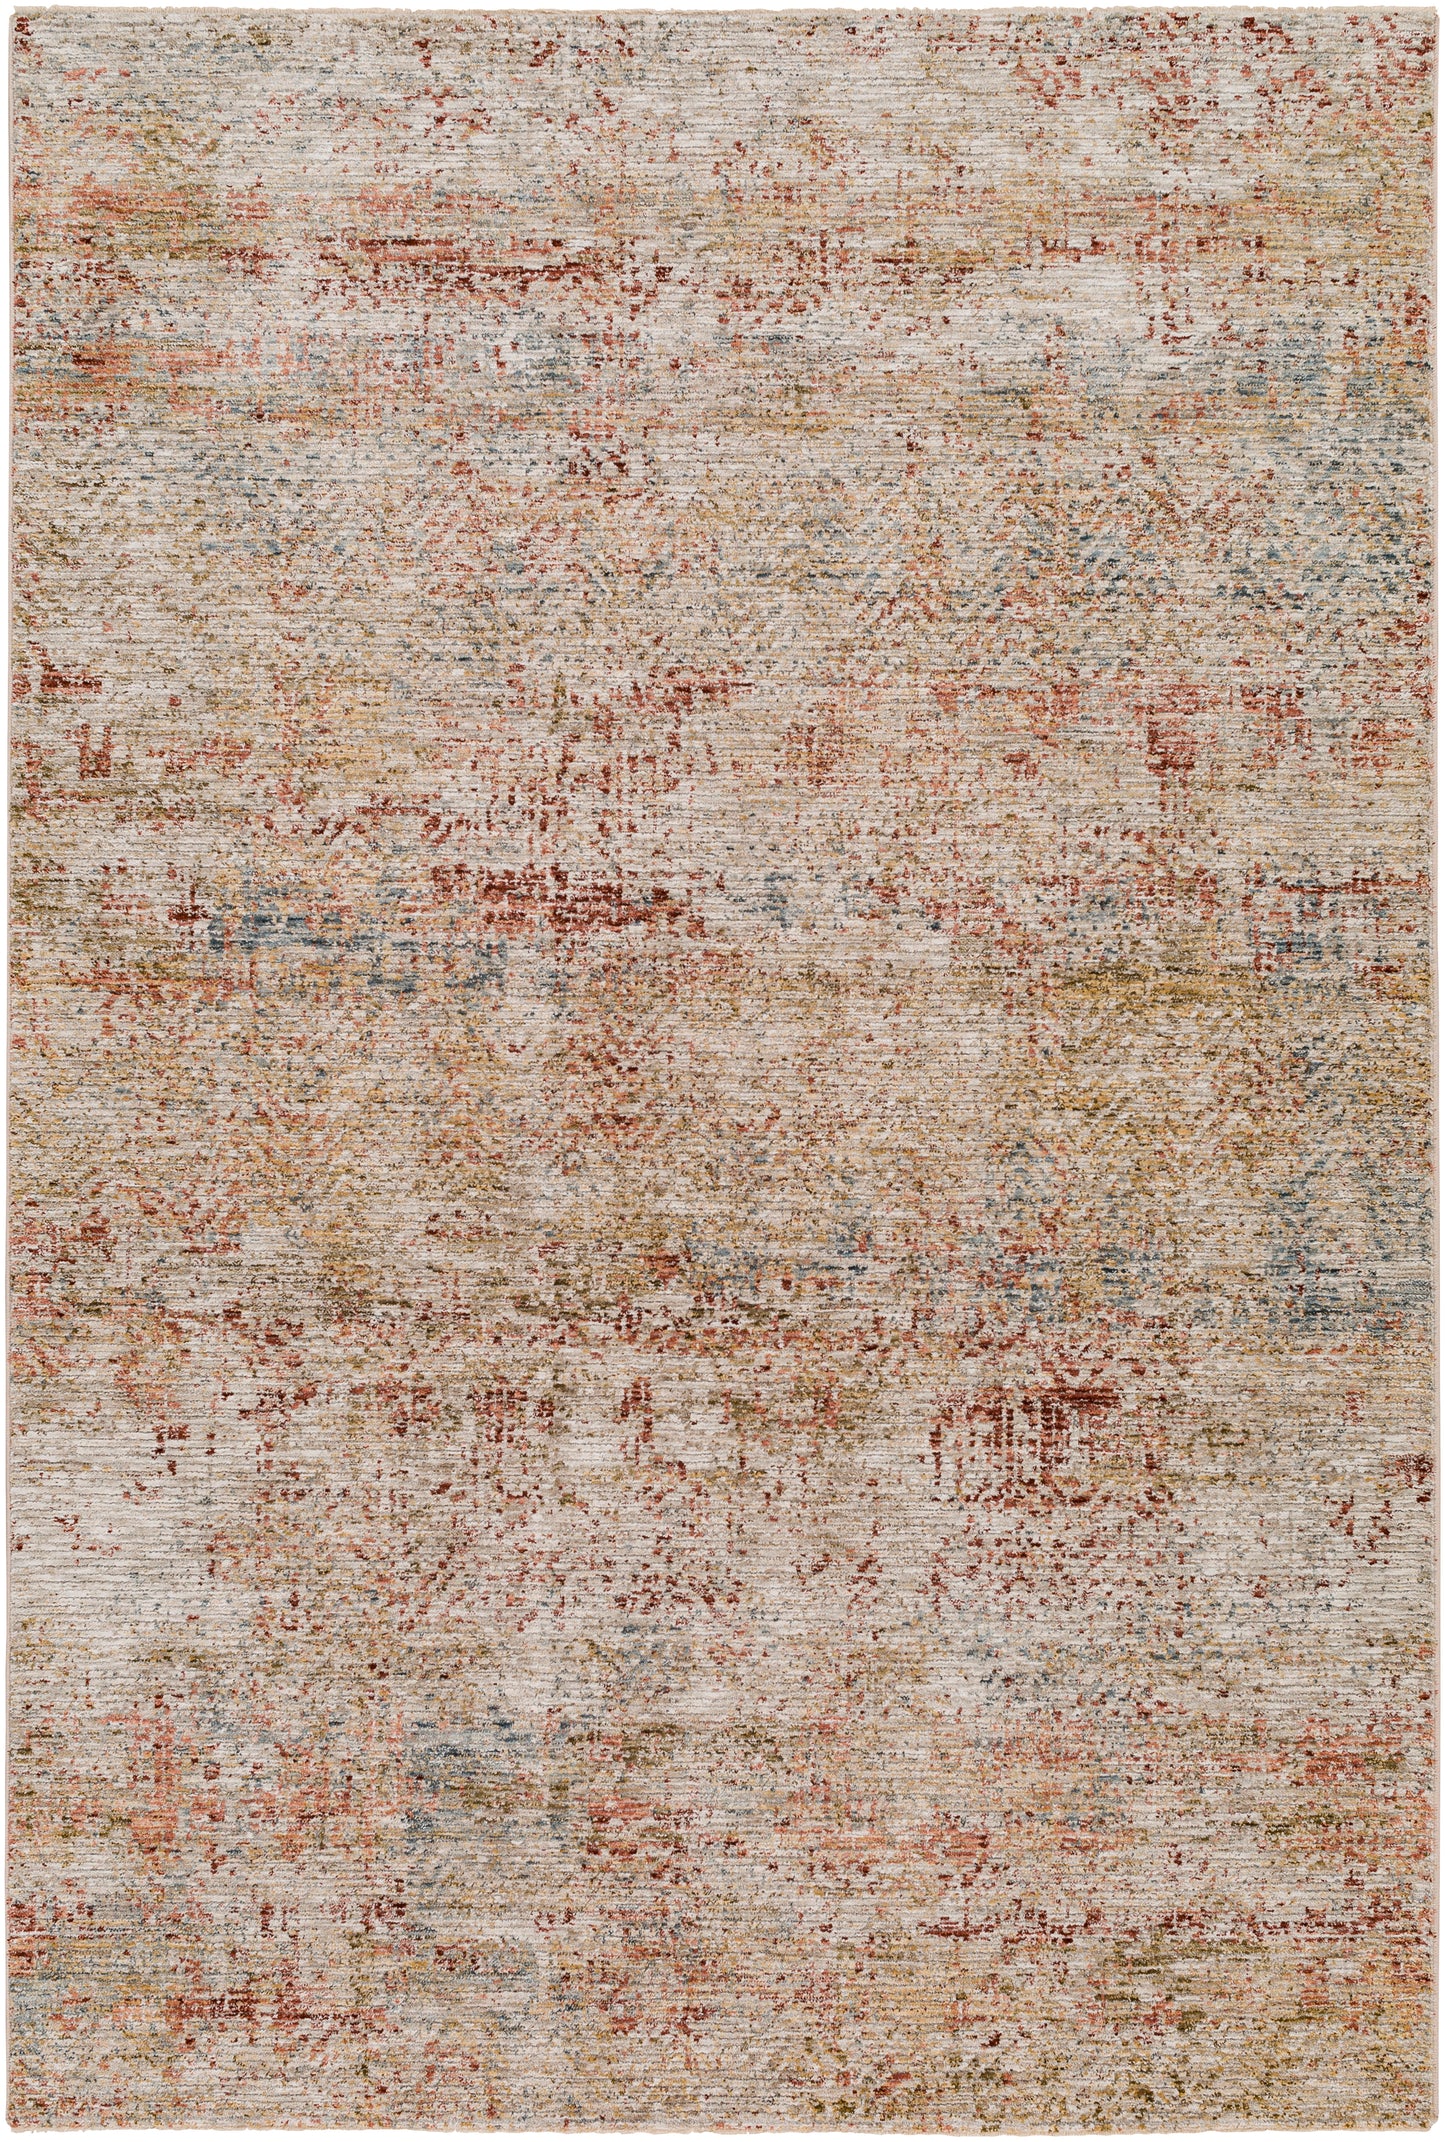 Naila 31169 Machine Woven Synthetic Blend Indoor Area Rug by Surya Rugs